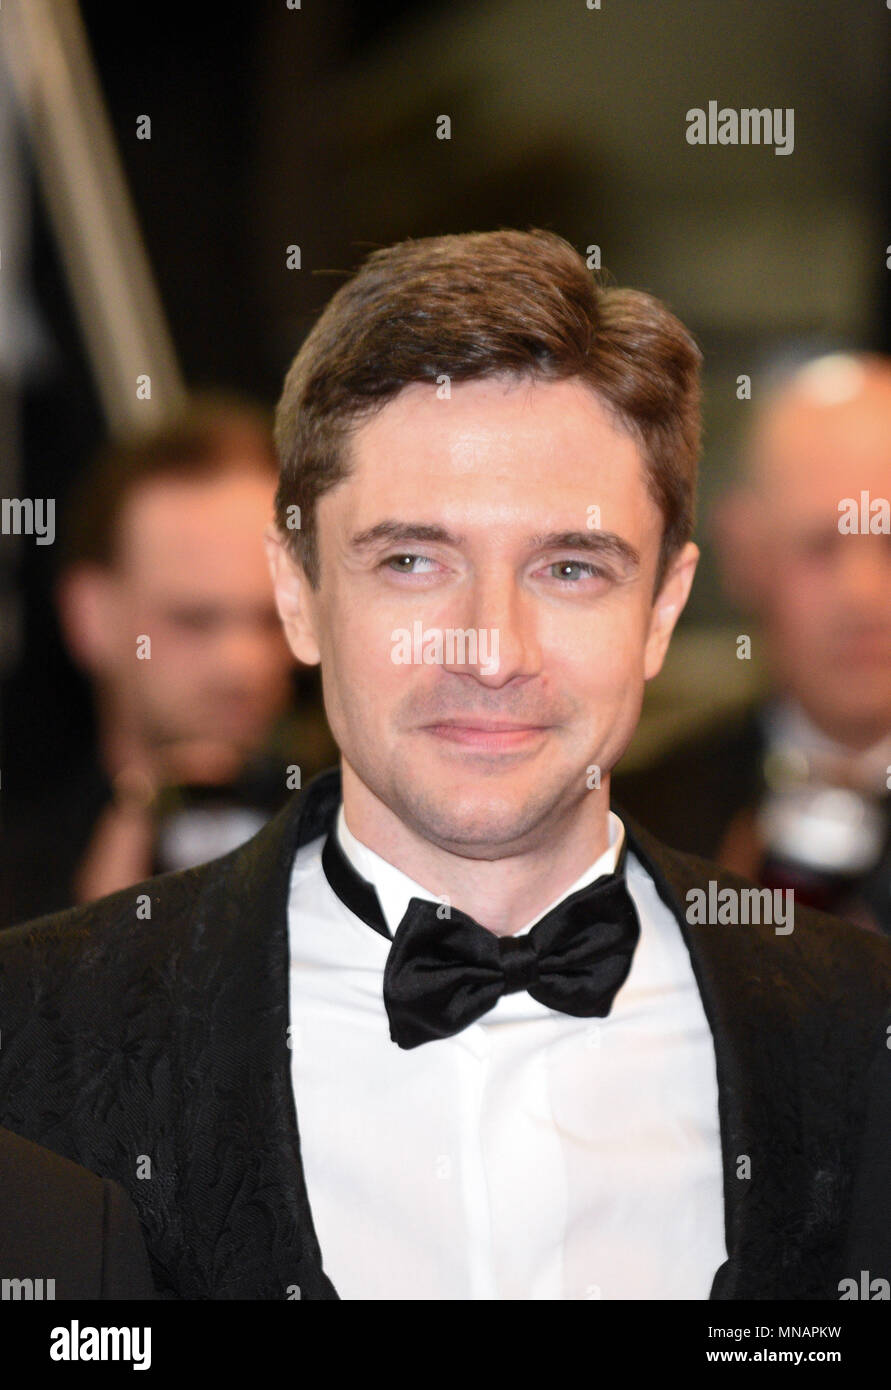 Cannes, France. May 15, 2018 - Cannes, France: Topher Grace attends the 'Under the Silver Lake' premiere during the 71st Cannes film festival. Credit: Idealink Photography/Alamy Live News Stock Photo